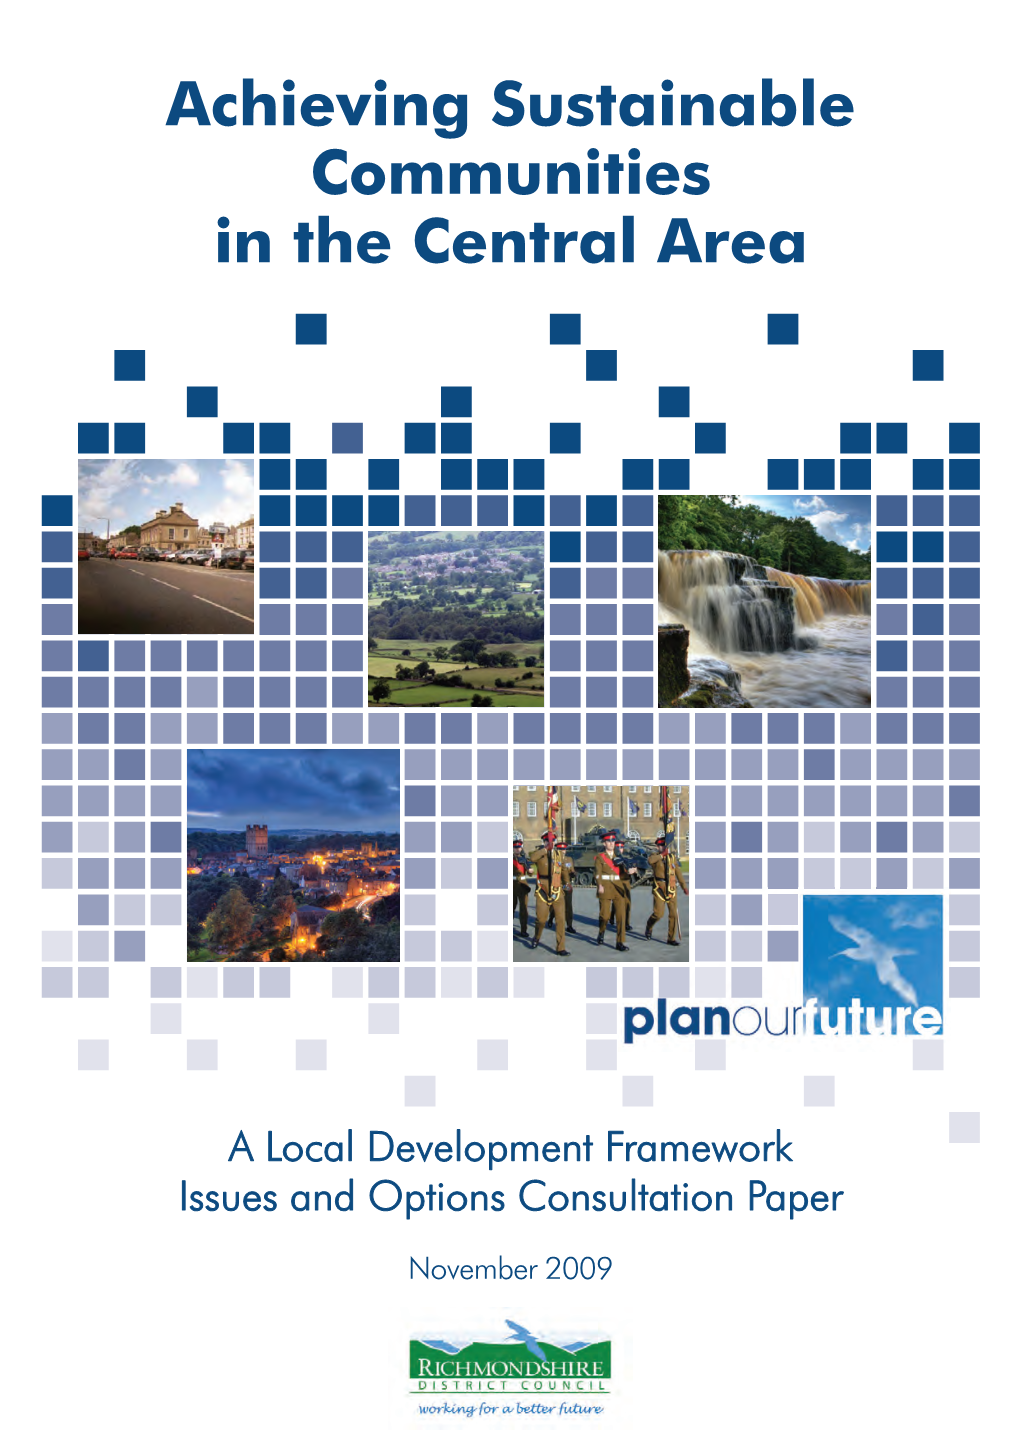 PP009 Achieving Sustainable Communities in the Central Area